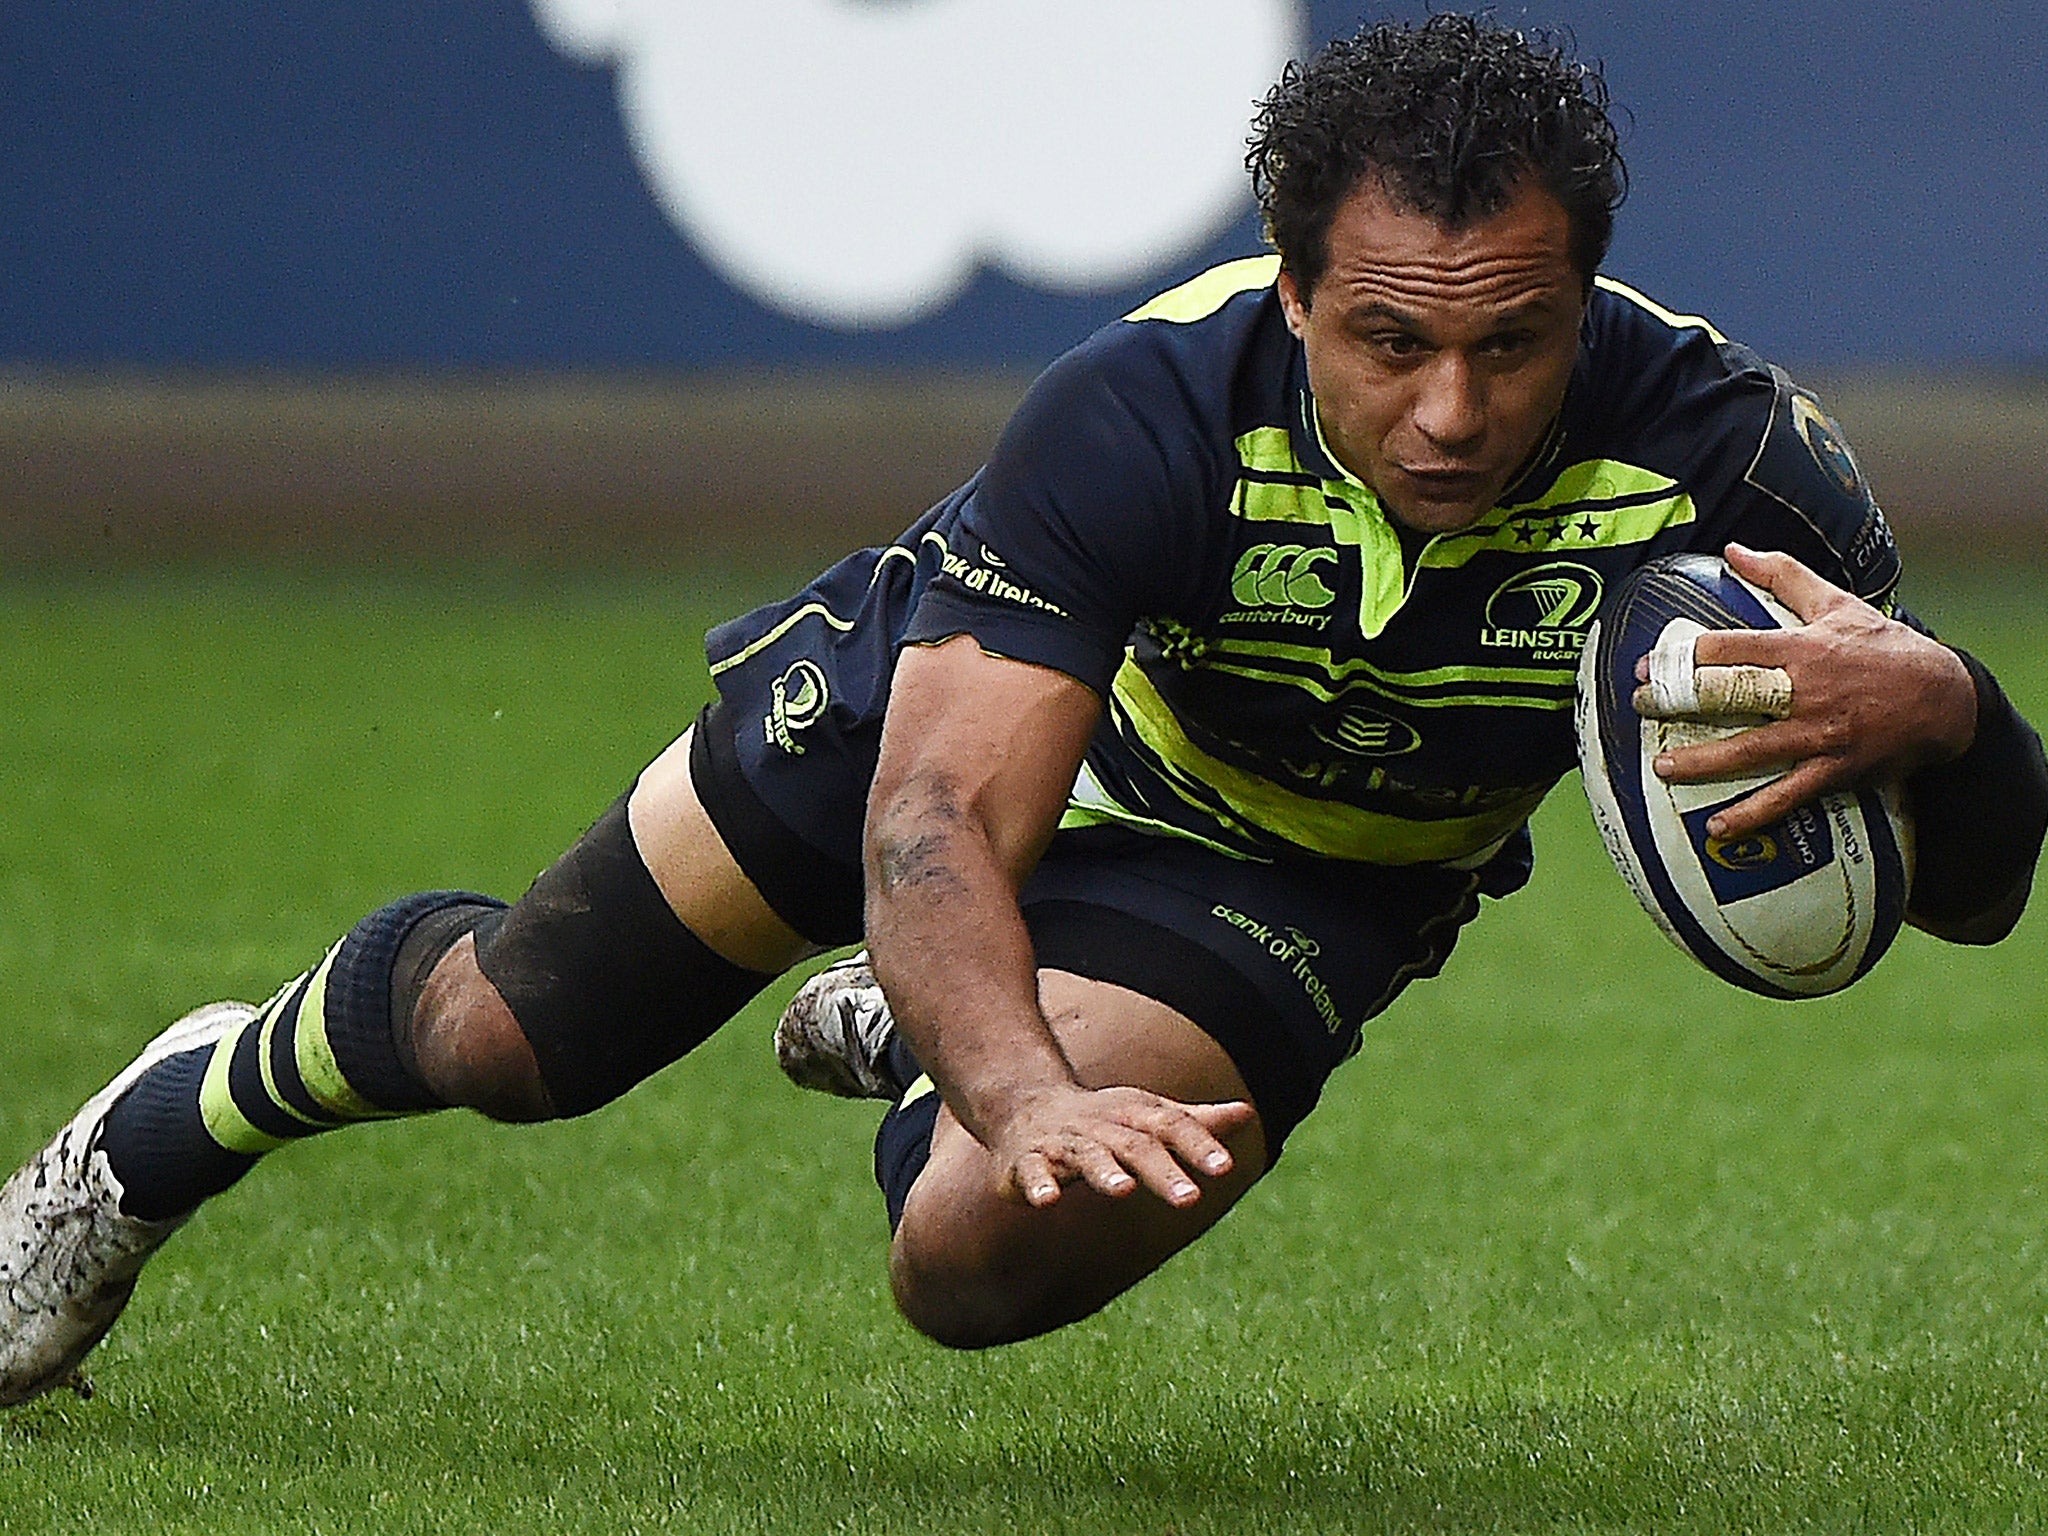 Isa Nacewa's late try rescued a bonus point for Leinster